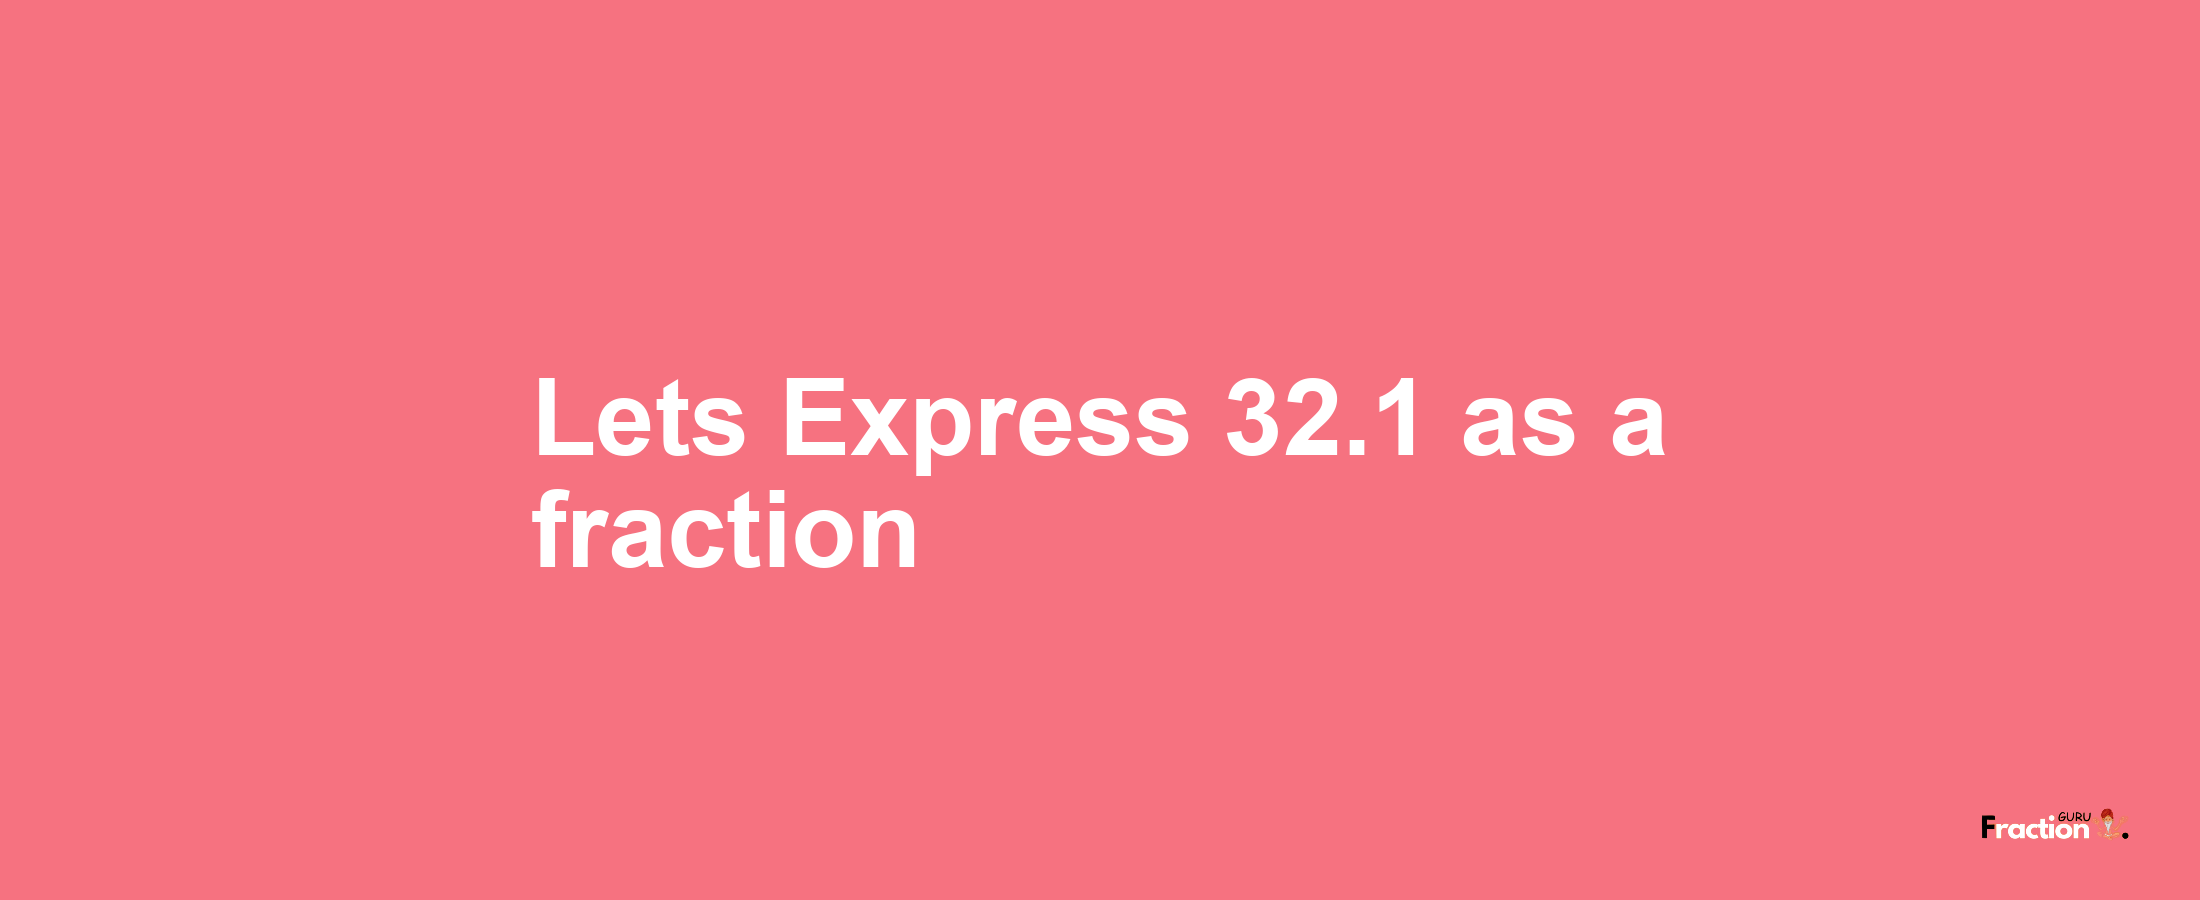 Lets Express 32.1 as afraction